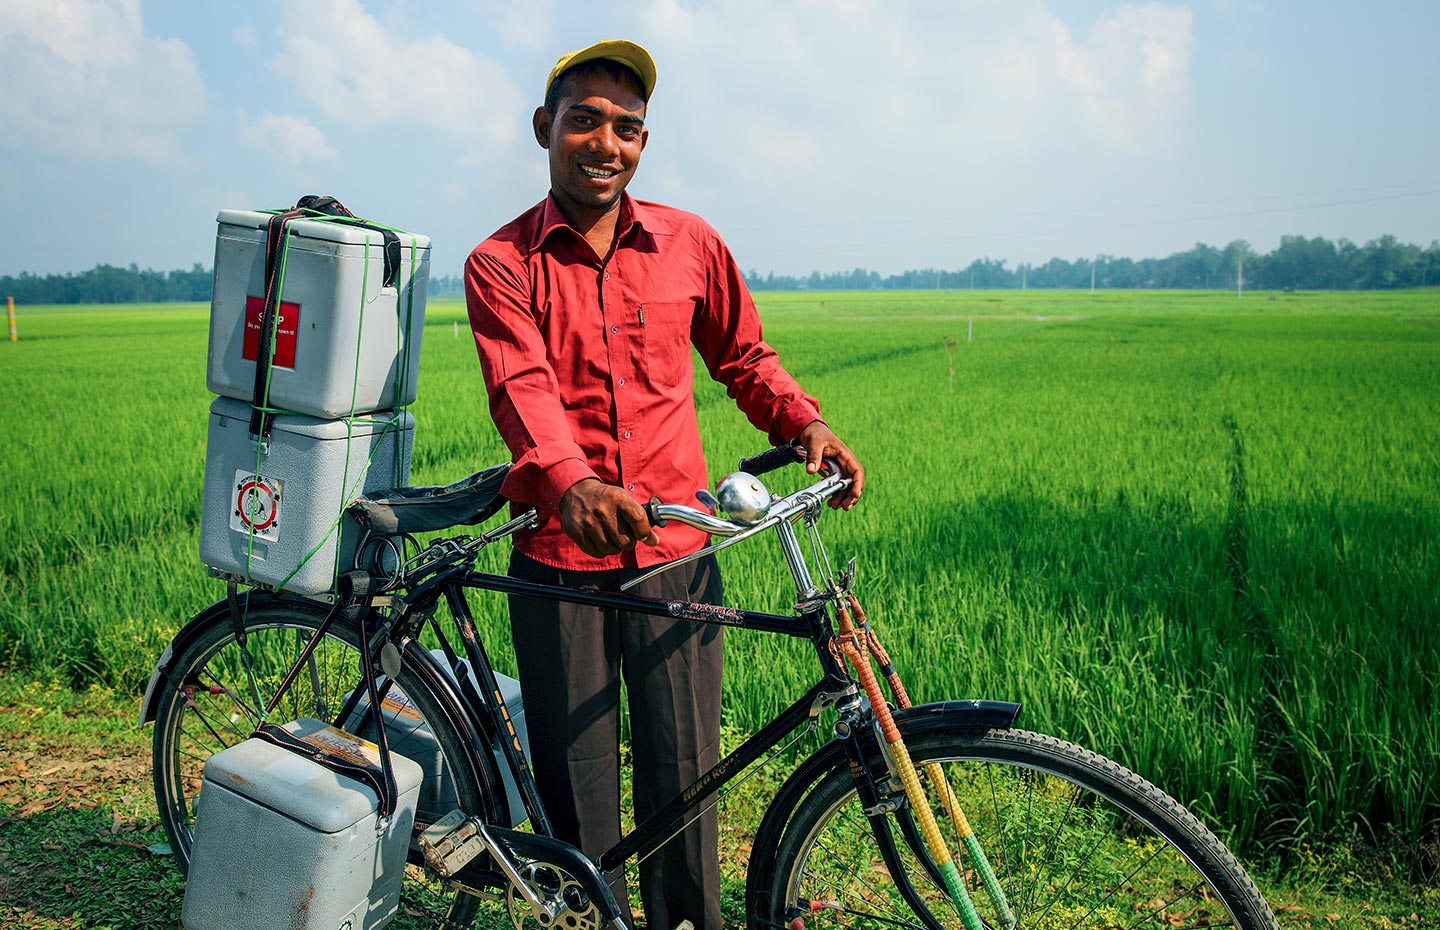 Transporting vaccines by bicycle. Credit: Gavi/2014/GMB Akash